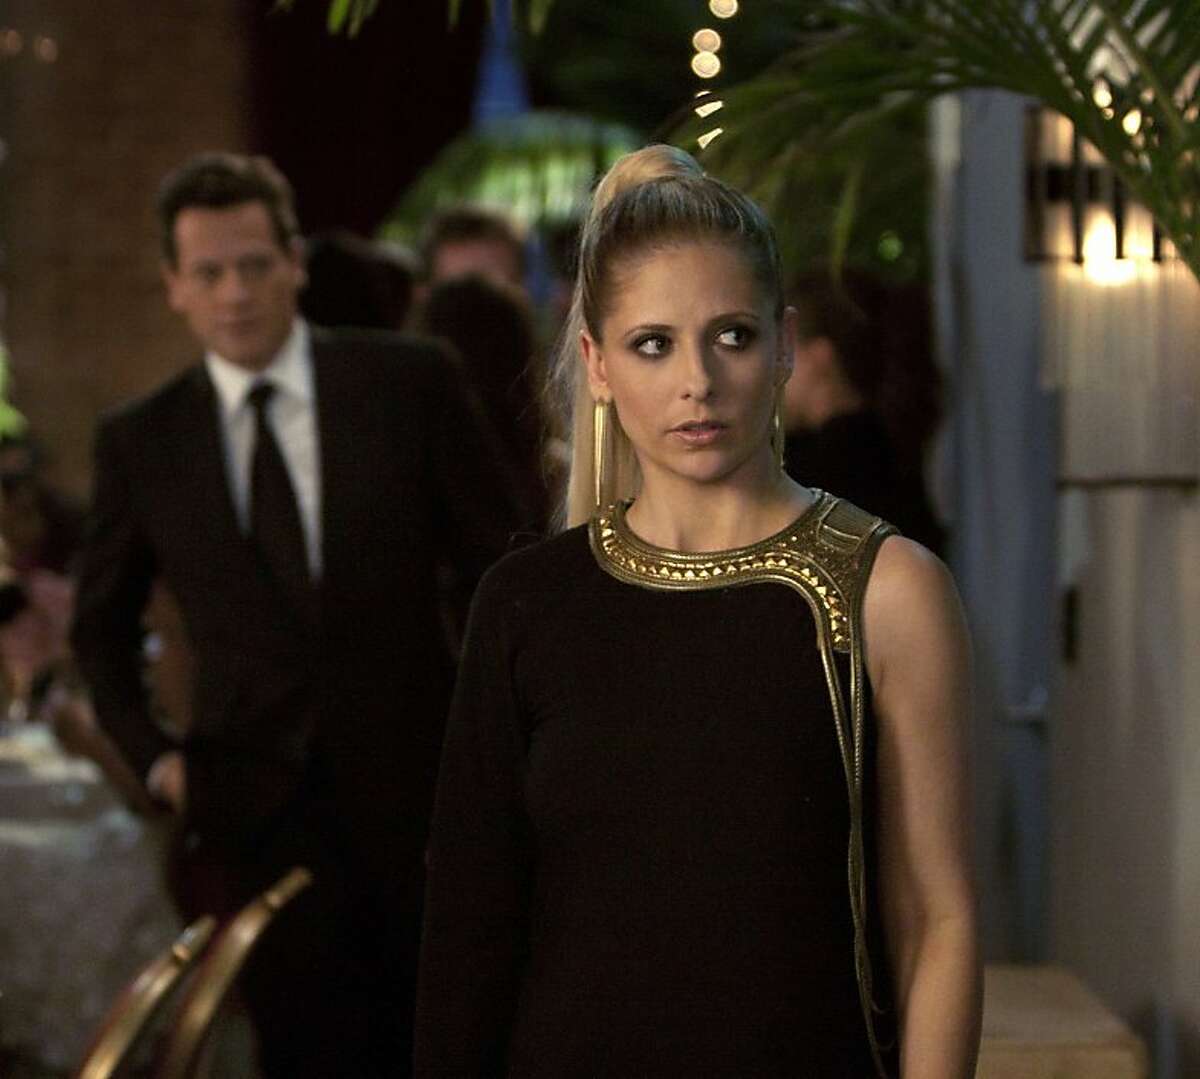 "She's RuiningEverything" -- Ioan Gruffudd as Andrew Martin and Sarah Michelle Gellar as Bridget Kelly/Siobhan Martin on Ringer on The CW.